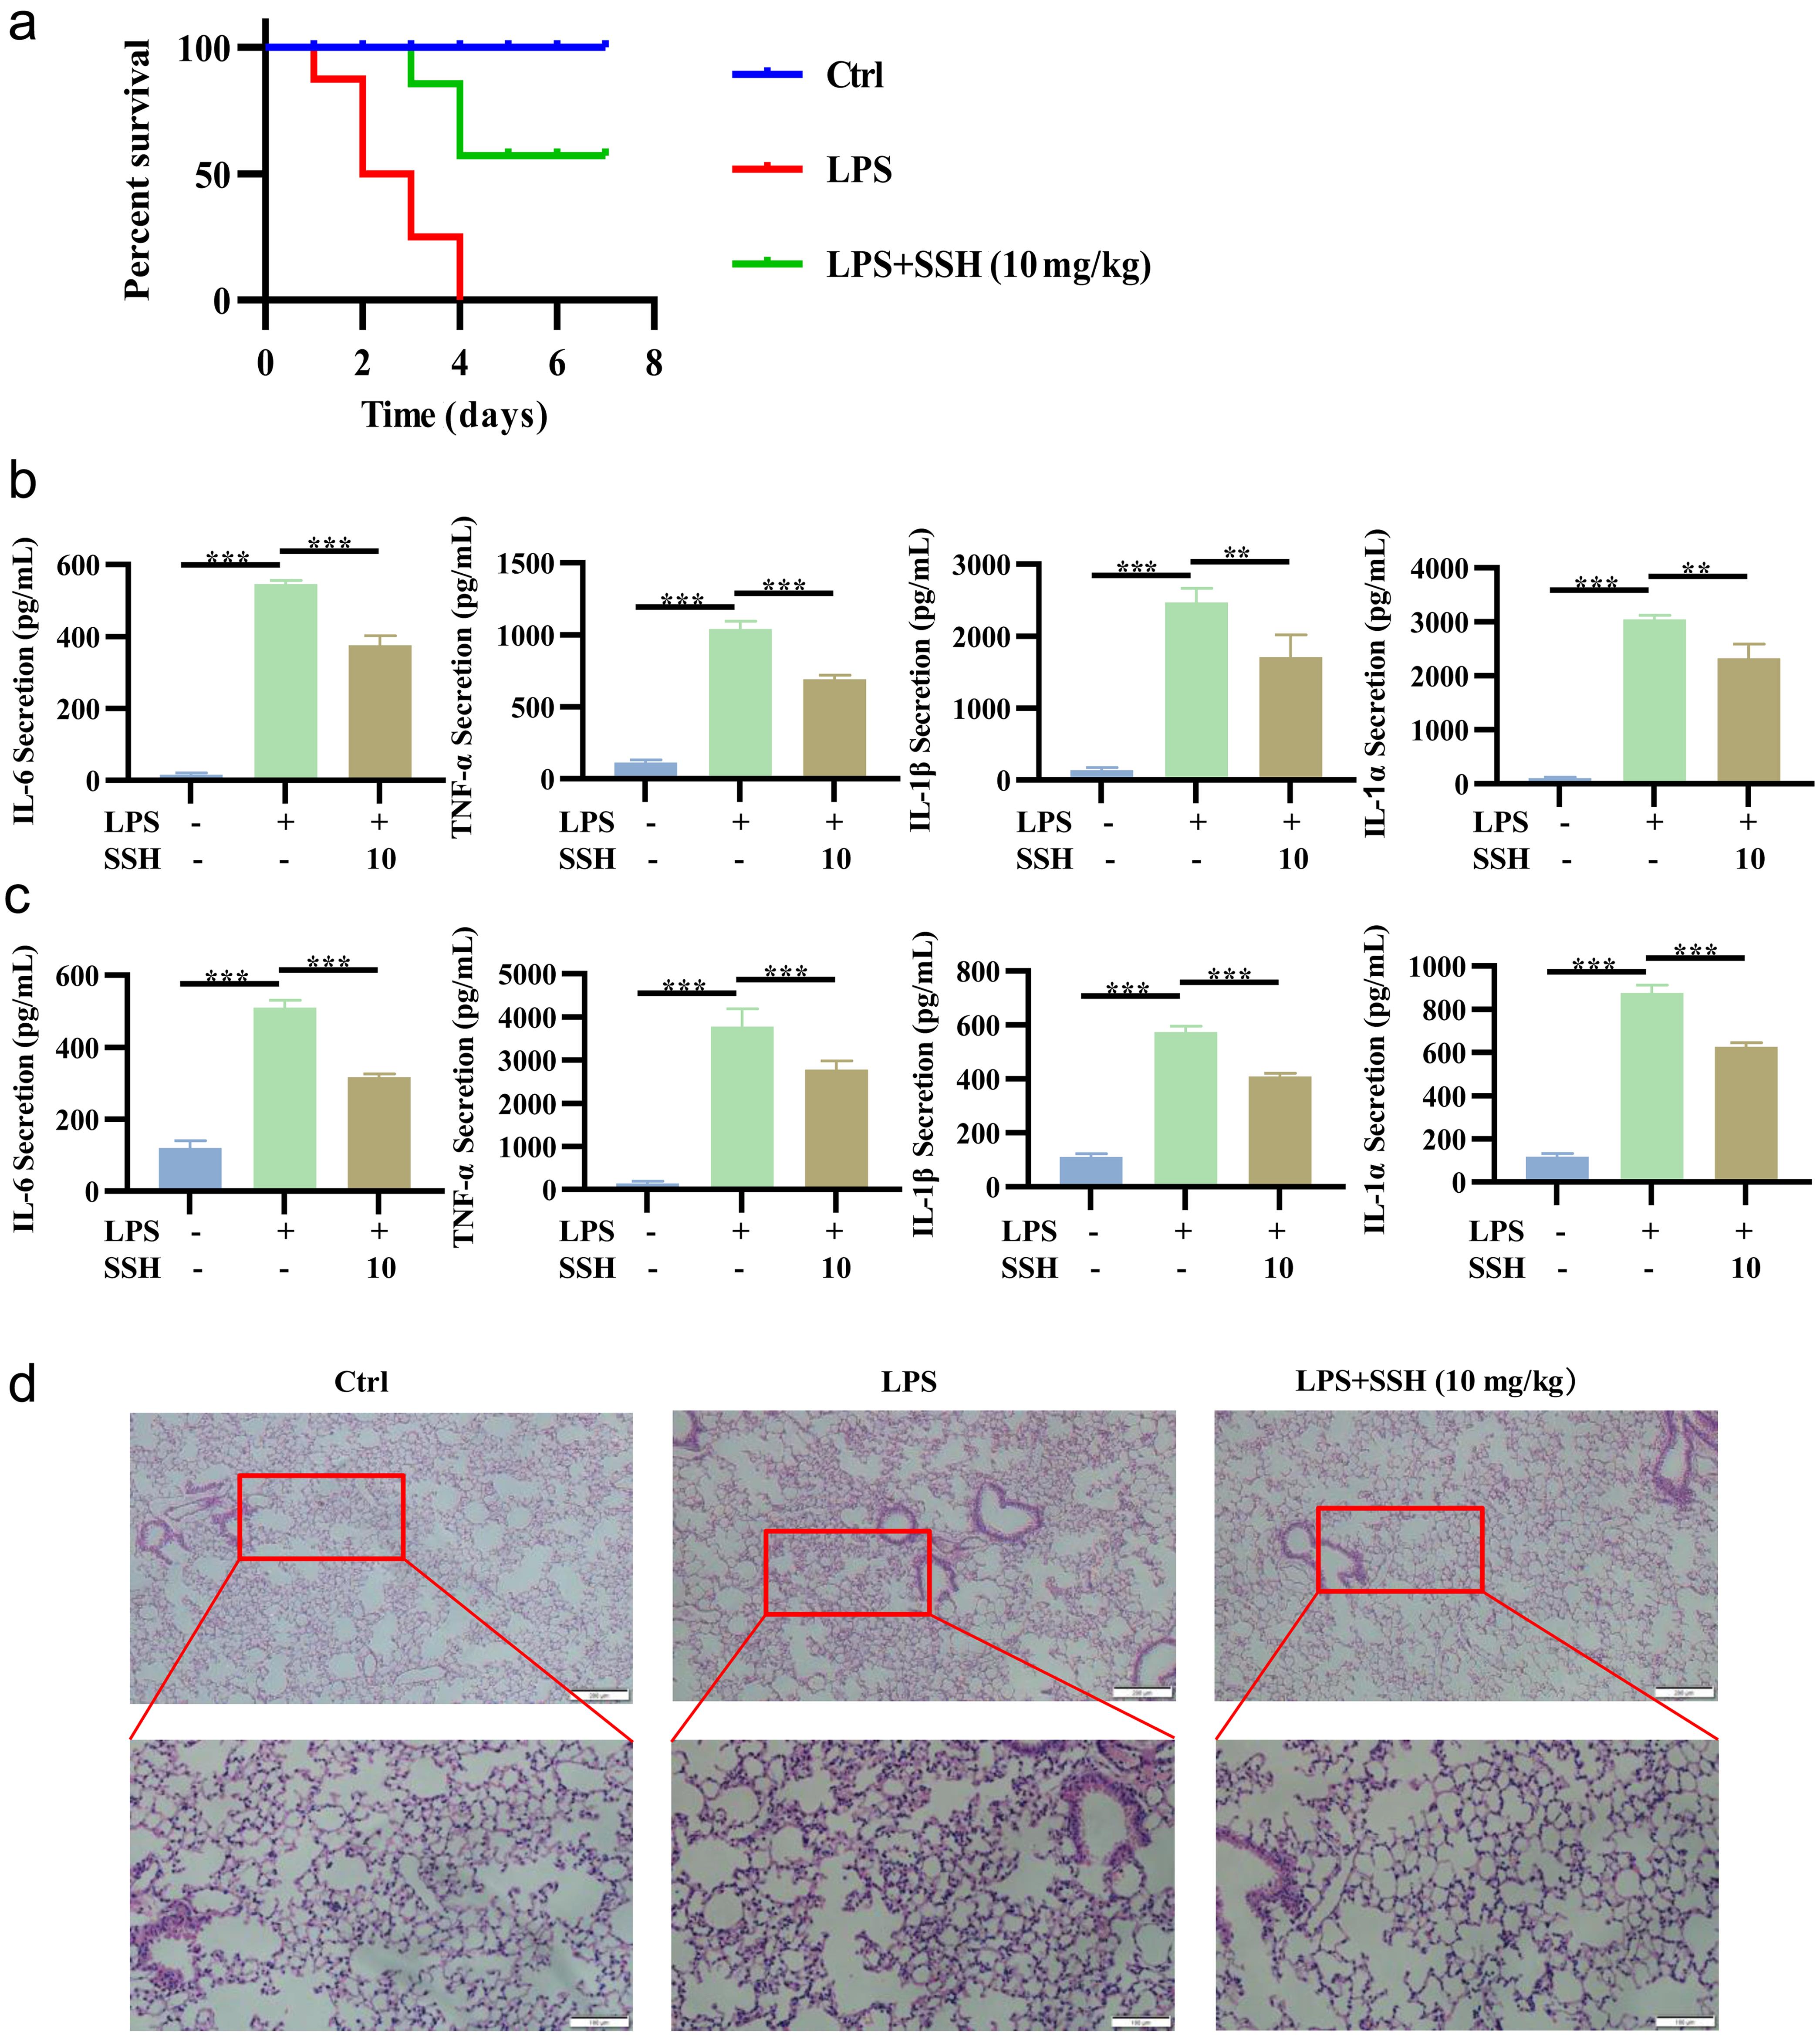 SSH significantly reduced the mortality and systemic inflammation levels in mice at high doses of LPS (5 mg/kg).